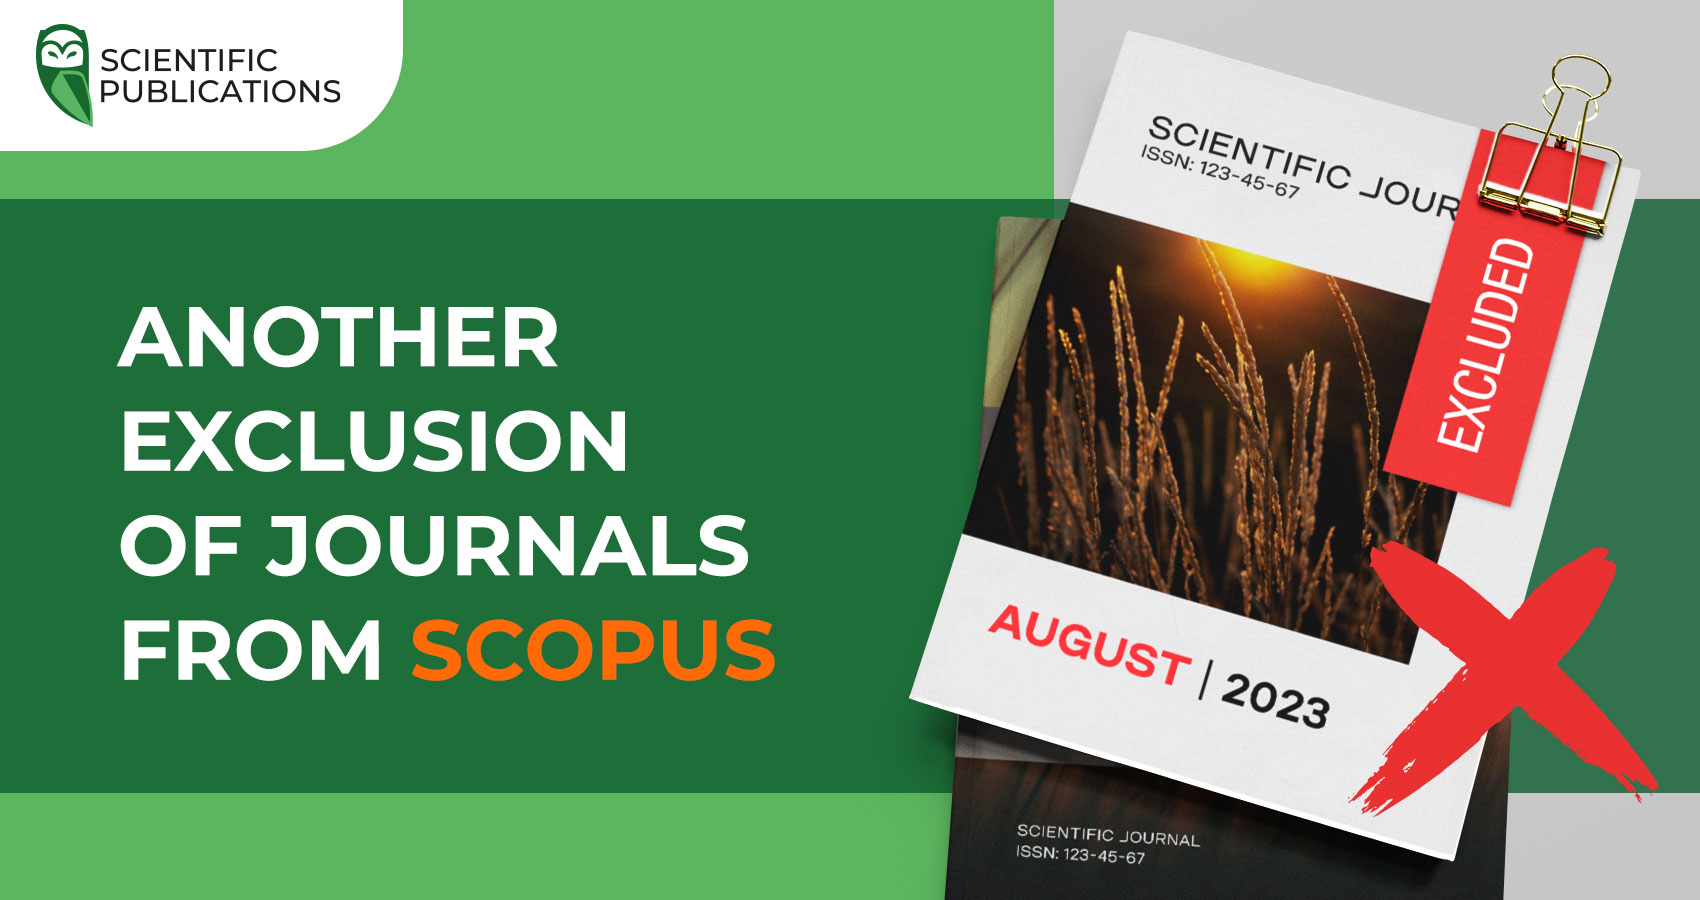 Exclusion of journals from the Scopus database for August 2023